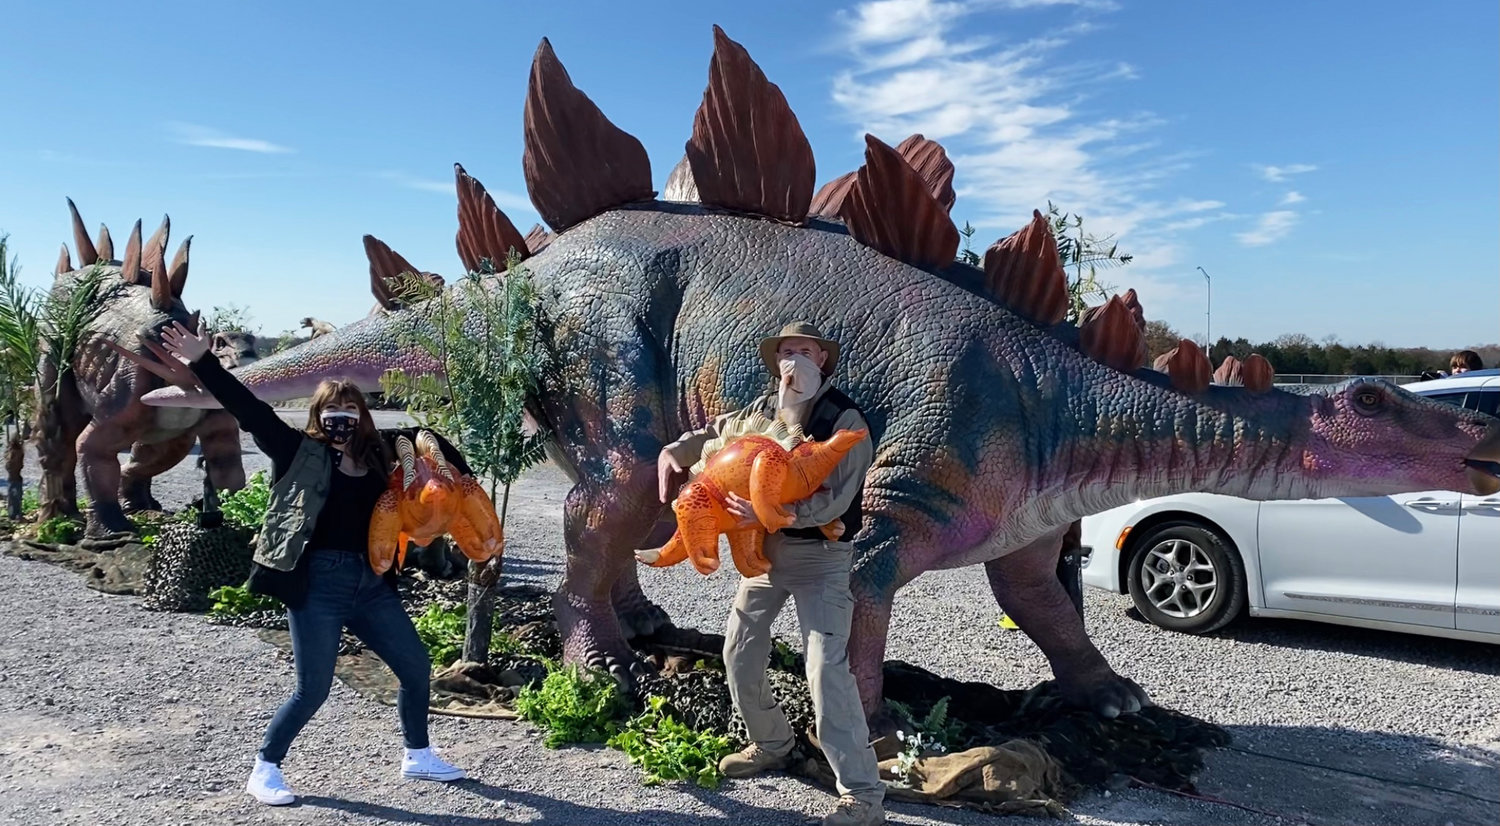 Jurassic Quest Most Well-Attended Dinosaur Festival in the World